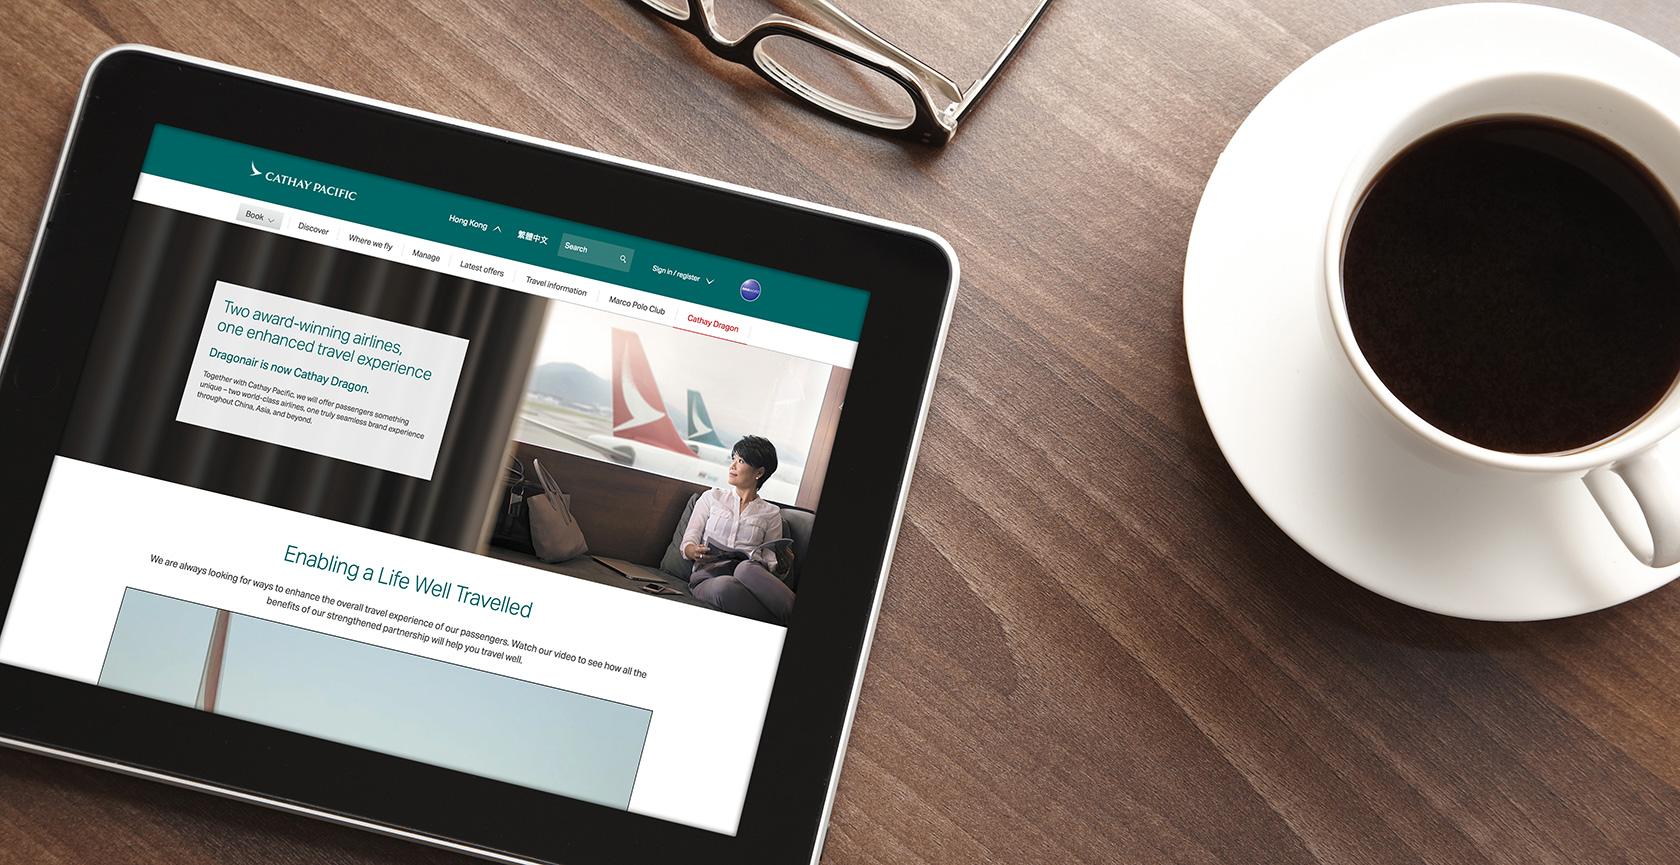 Measuring the ROI of UX with the Cathay Pacific B2B UX redesign case study.